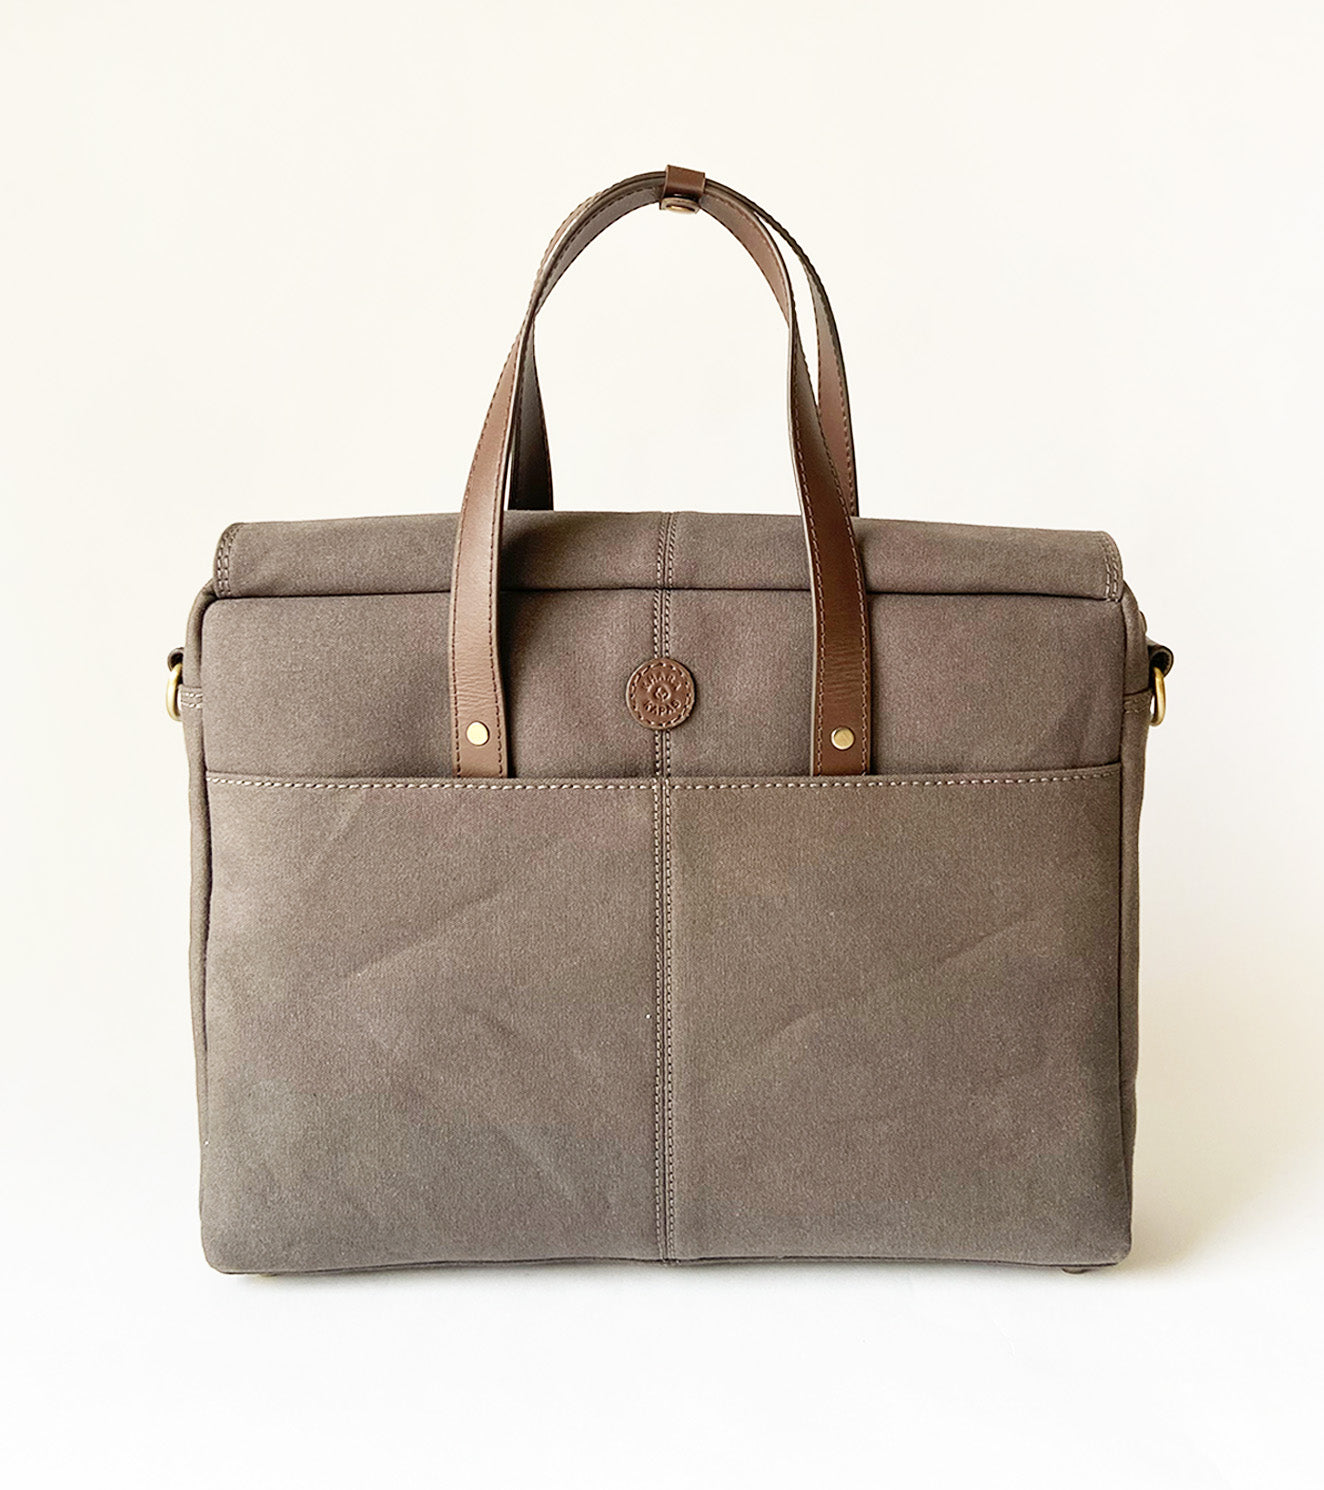 Charcoal briefcase